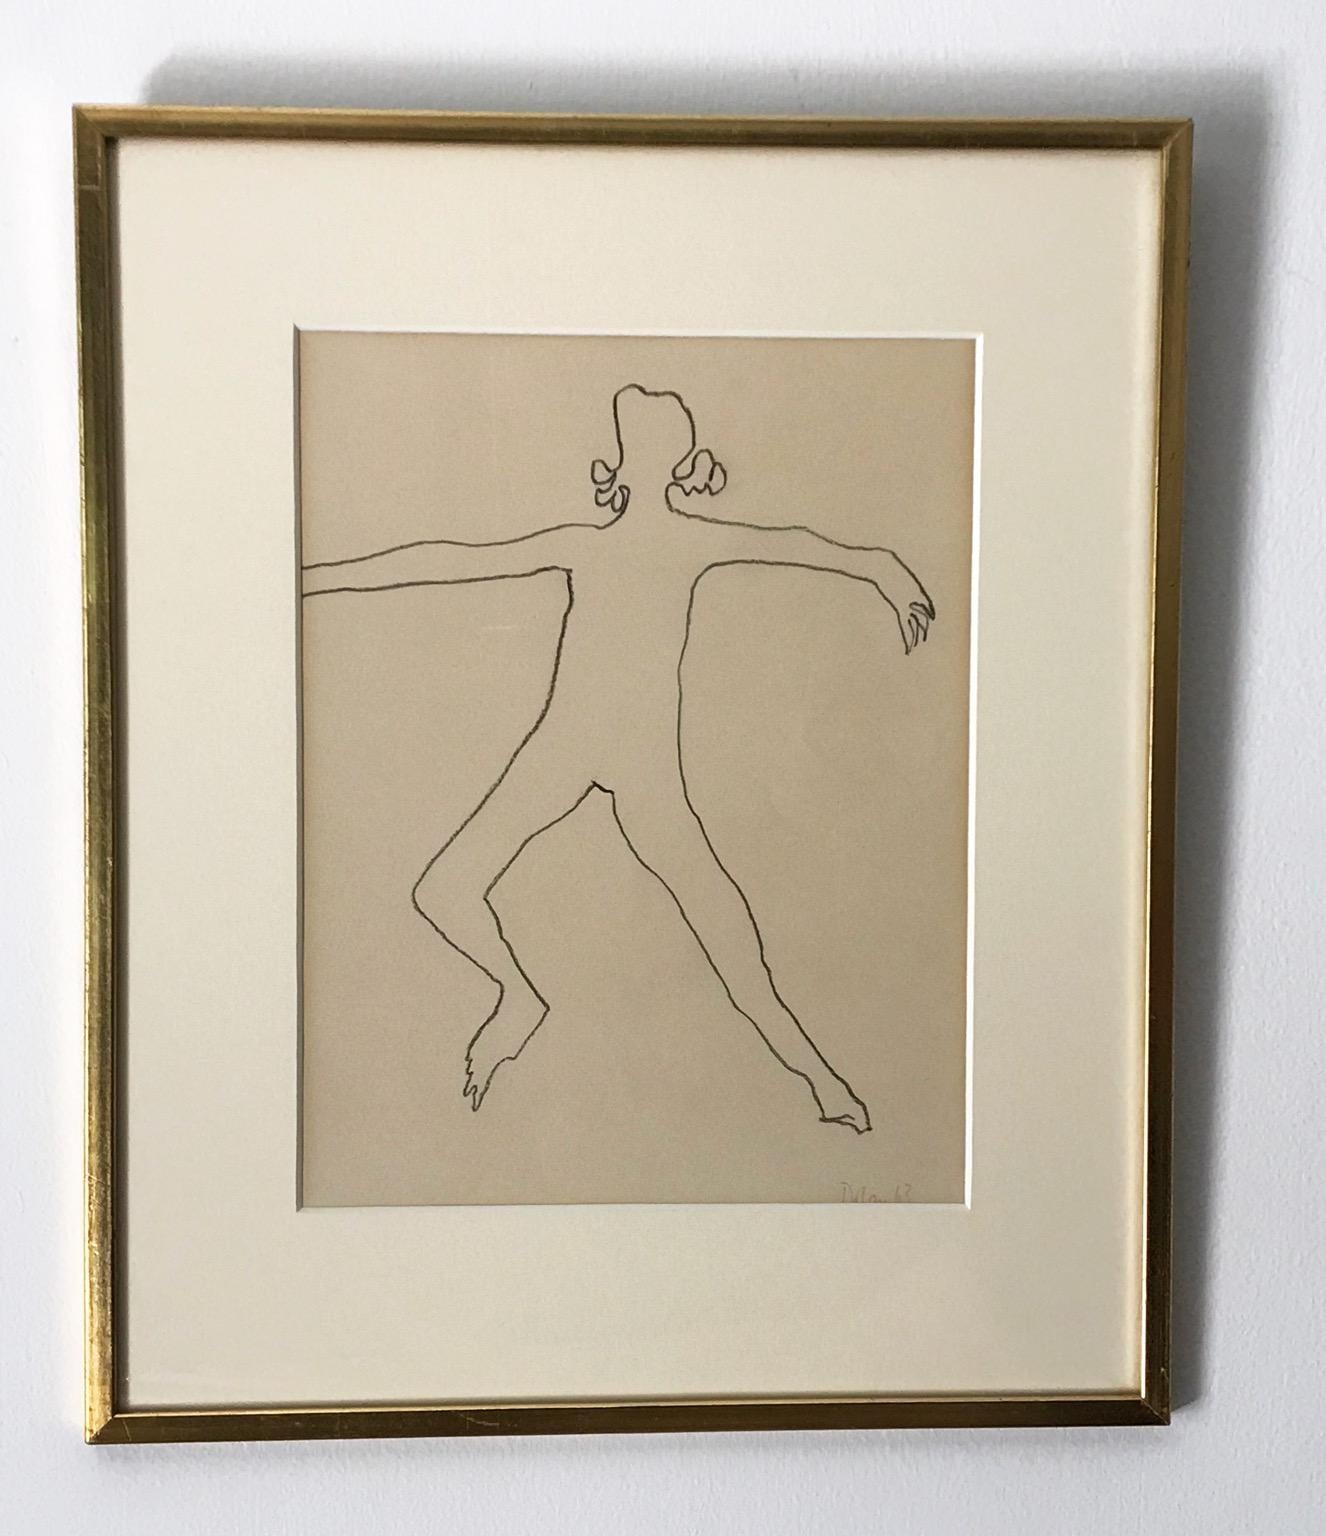 A pencil on paper sketch entitled 'Dancer' - signed and dated. Provenance: Queen Square Gallery, Leeds.

Framed in a gilt frame with labels verso.

Patrick Dolan (1926-1980)
Patrick Dolan was born in Ireland. He was an associate of Francis